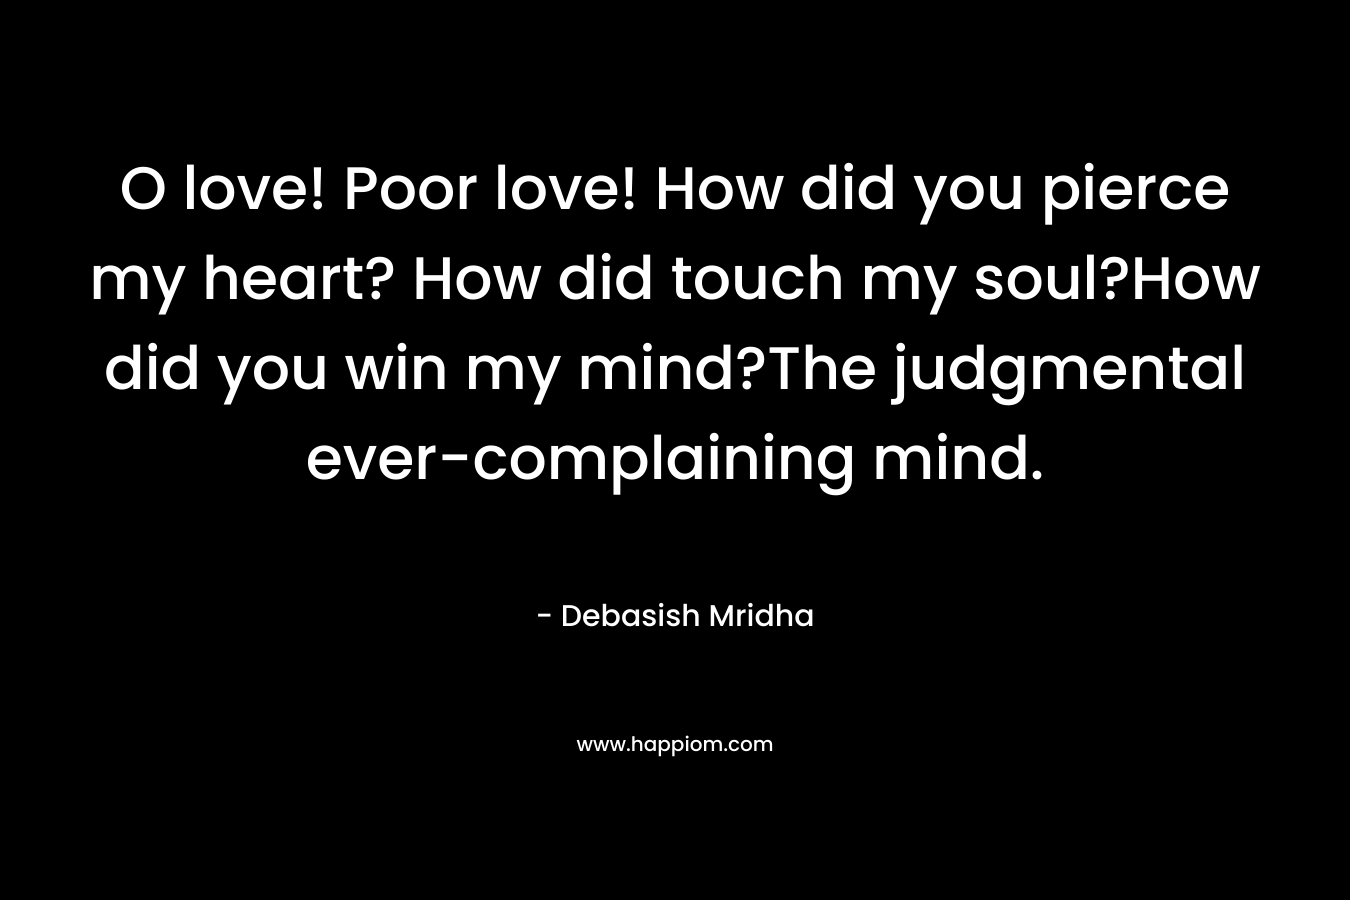 O love! Poor love! How did you pierce my heart? How did touch my soul?How did you win my mind?The judgmental ever-complaining mind.